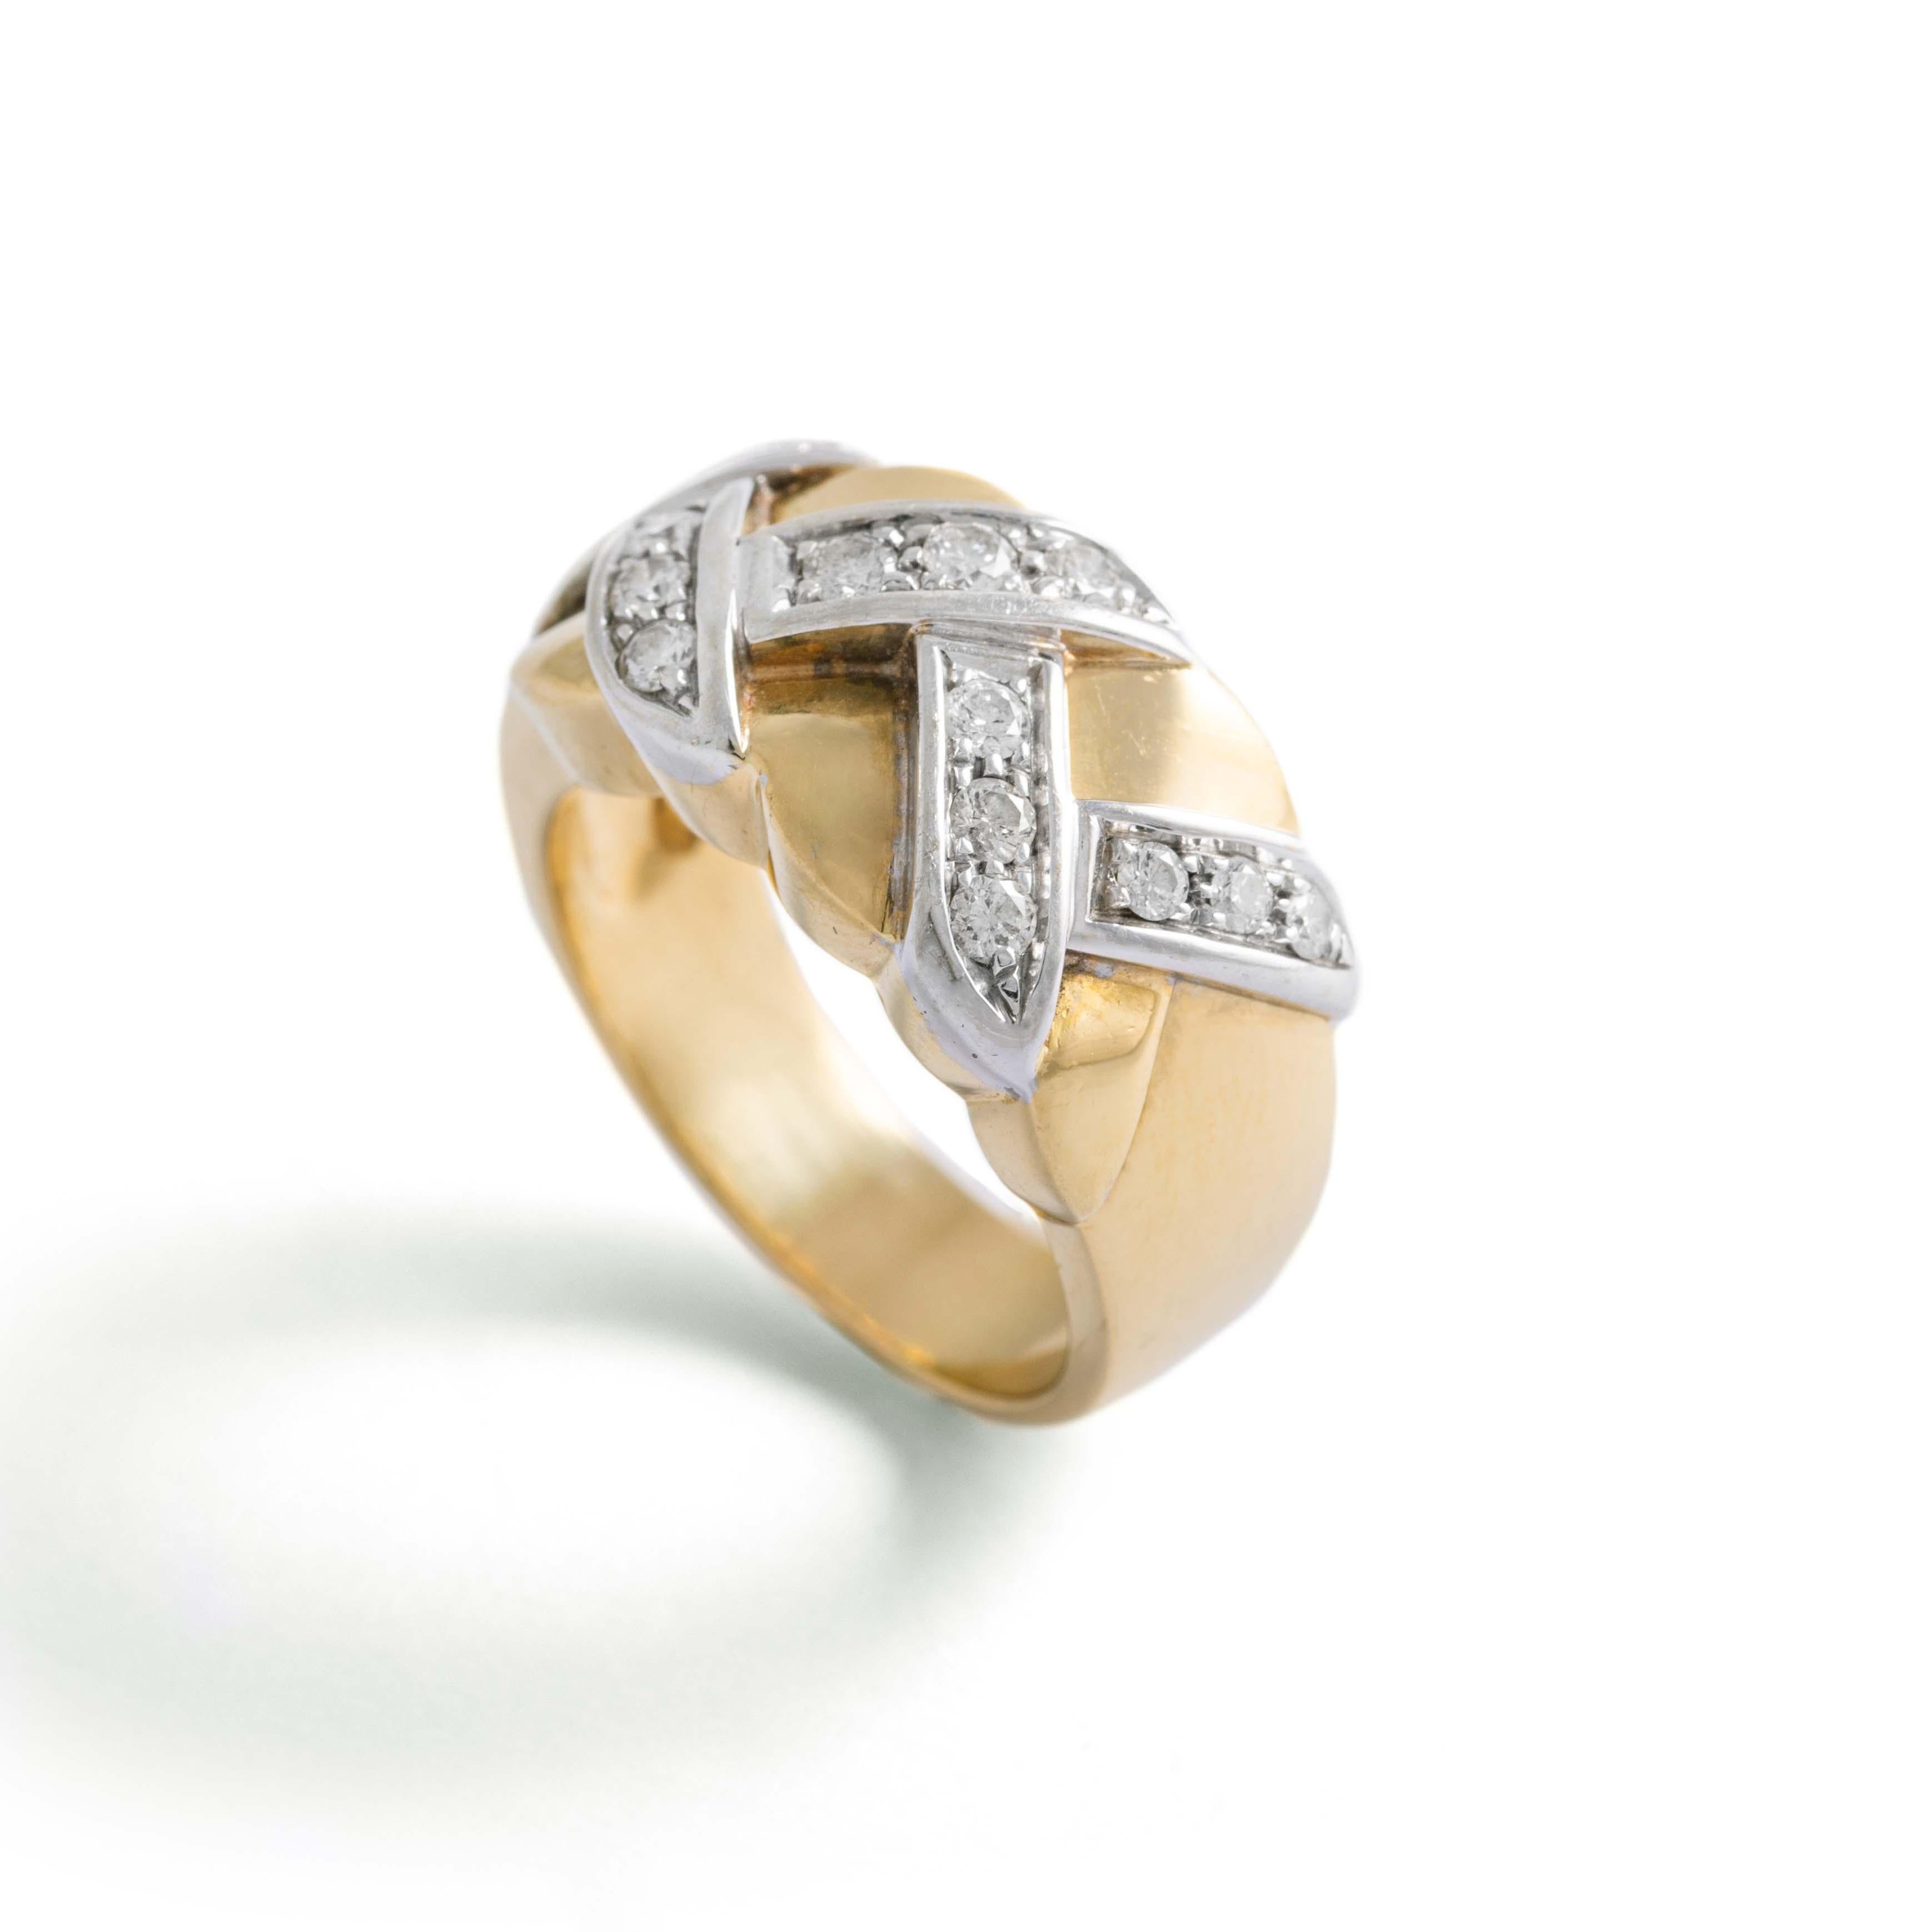 18K yellow and white gold ring set with round-cut diamonds.
Probably Pomellato, not signed.
Size: 58. 
Gross weight: 16.95 grams.